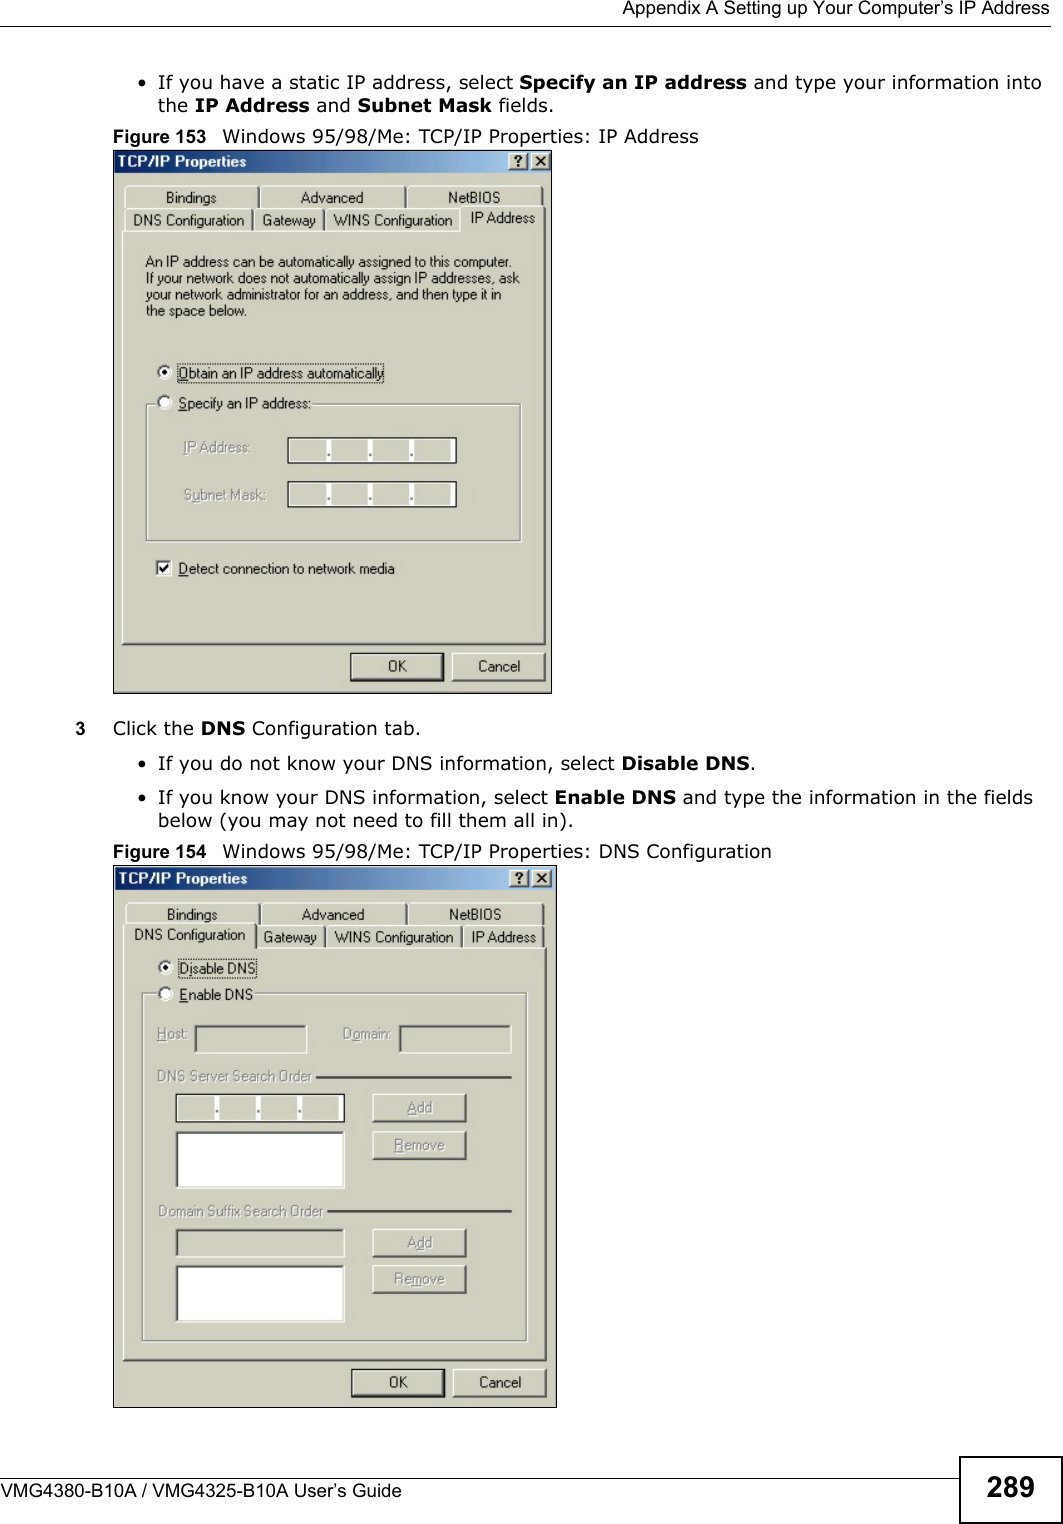  Appendix A Setting up Your Computer’s IP AddressVMG4380-B10A / VMG4325-B10A User’s Guide 289• If you have a static IP address, select Specify an IP address and type your information into the IP Address and Subnet Mask fields.Figure 153   Windows 95/98/Me: TCP/IP Properties: IP Address3Click the DNS Configuration tab.• If you do not know your DNS information, select Disable DNS.• If you know your DNS information, select Enable DNS and type the information in the fields below (you may not need to fill them all in).Figure 154  Windows 95/98/Me: TCP/IP Properties: DNS Configuration